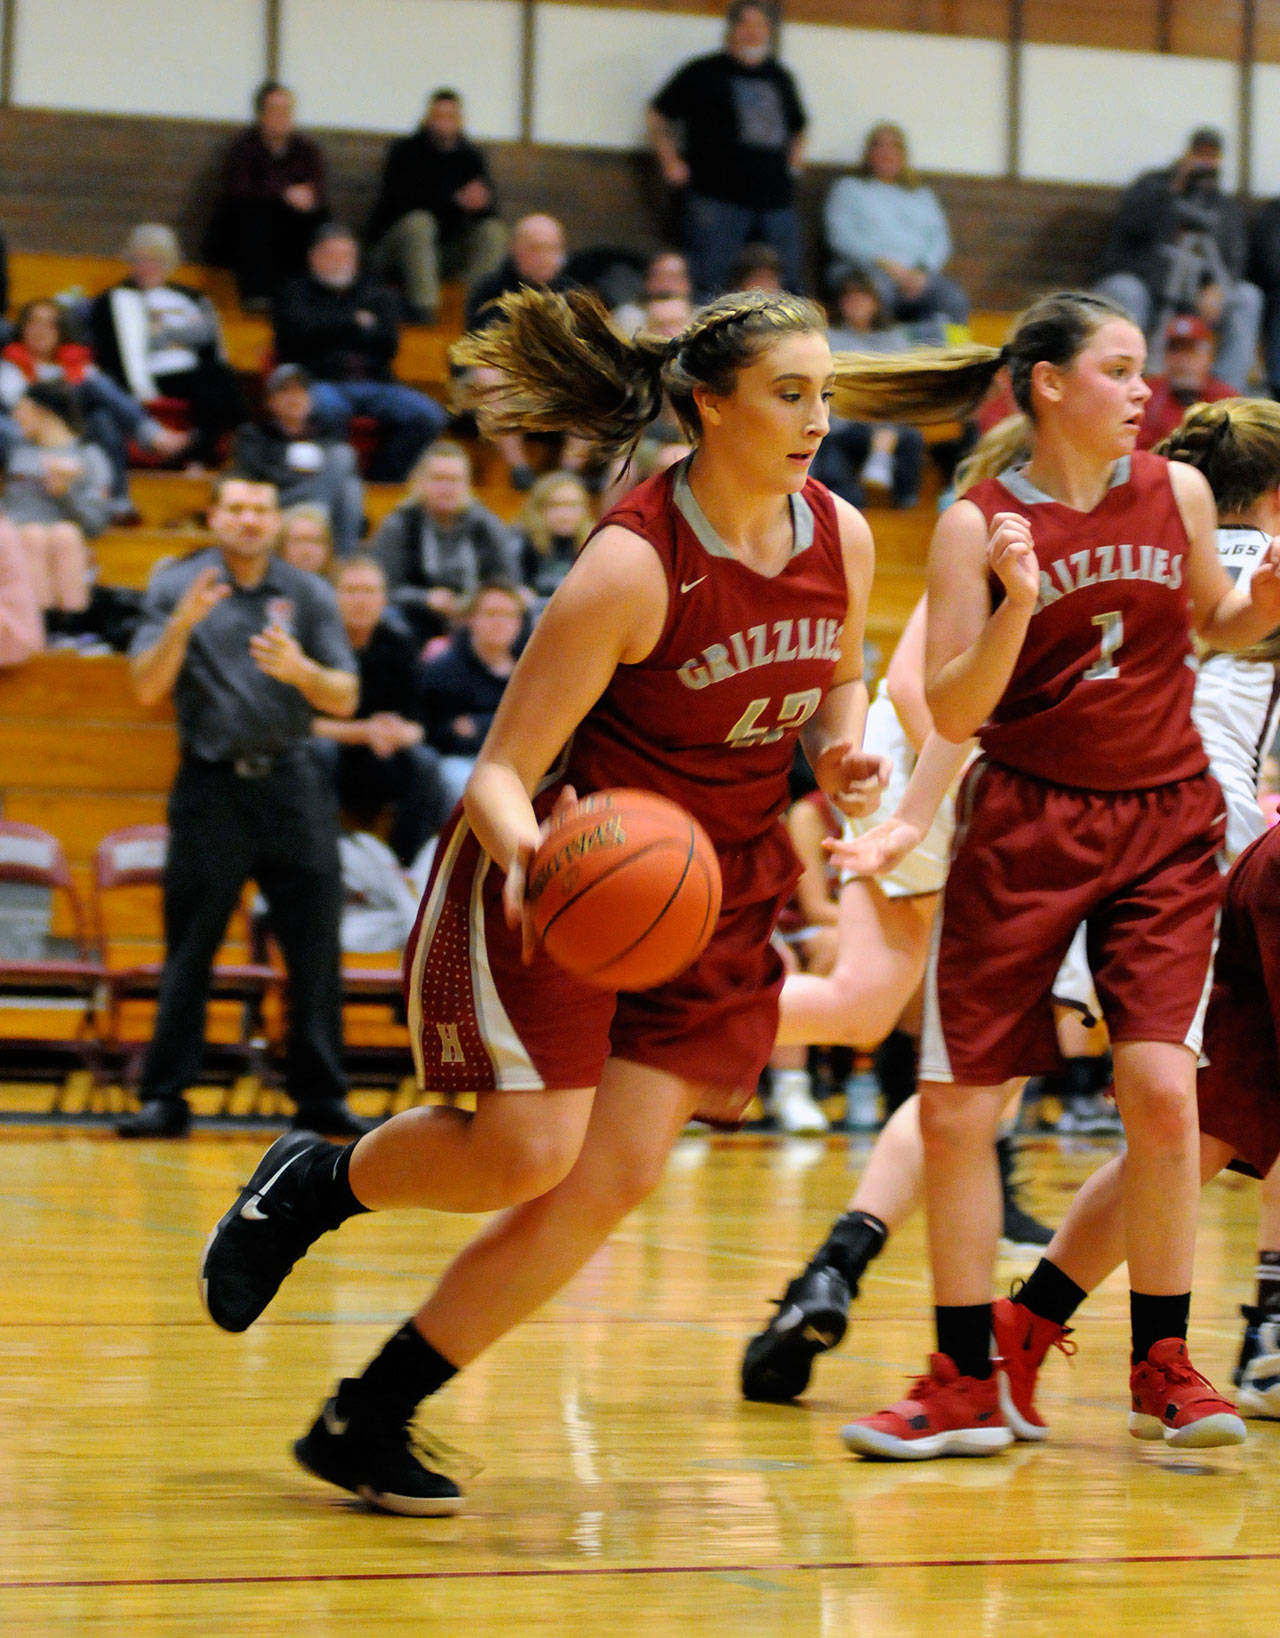 Hoquiam’s Rylee Vonhof dribbles out of pressure during the first half of Thursday’s game in Montesano. Vonhof scored a game-high 22 points and grabbed 12 rebounds for the Grizzlies. (Ryan Sparks | Grays Harbor News Group)